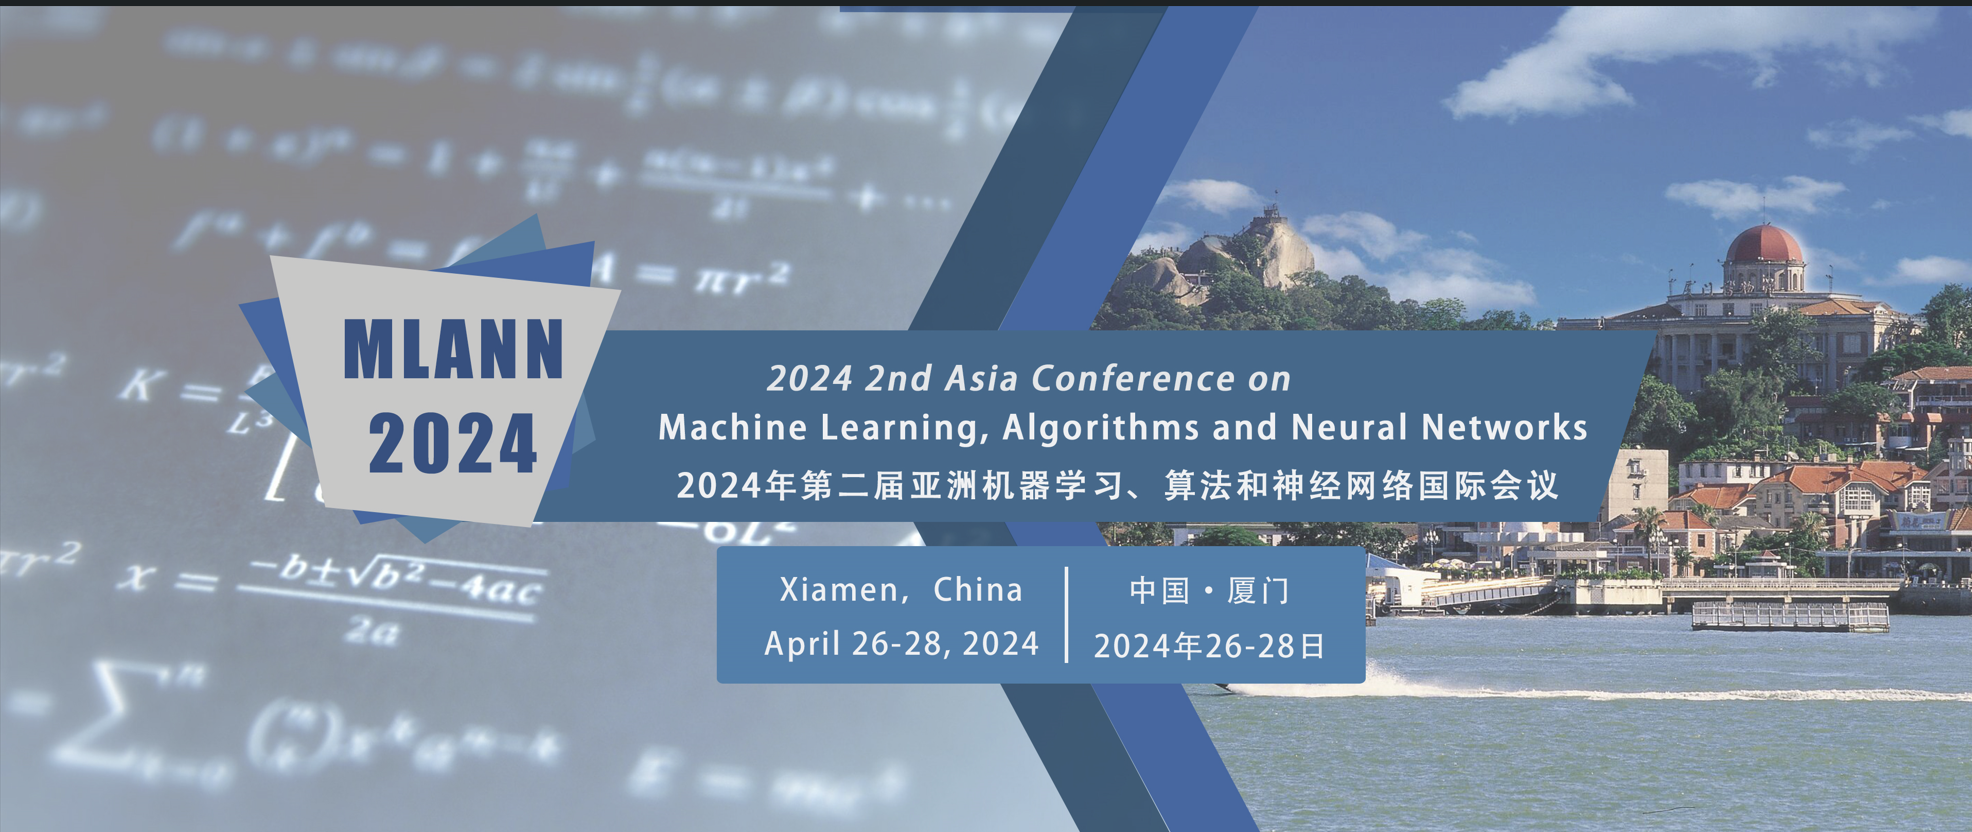 2024 2nd Asia Conference on Machine Learning, Algorithms and Neural Networks (MLANN 2024), Xiamen, Fujian, China